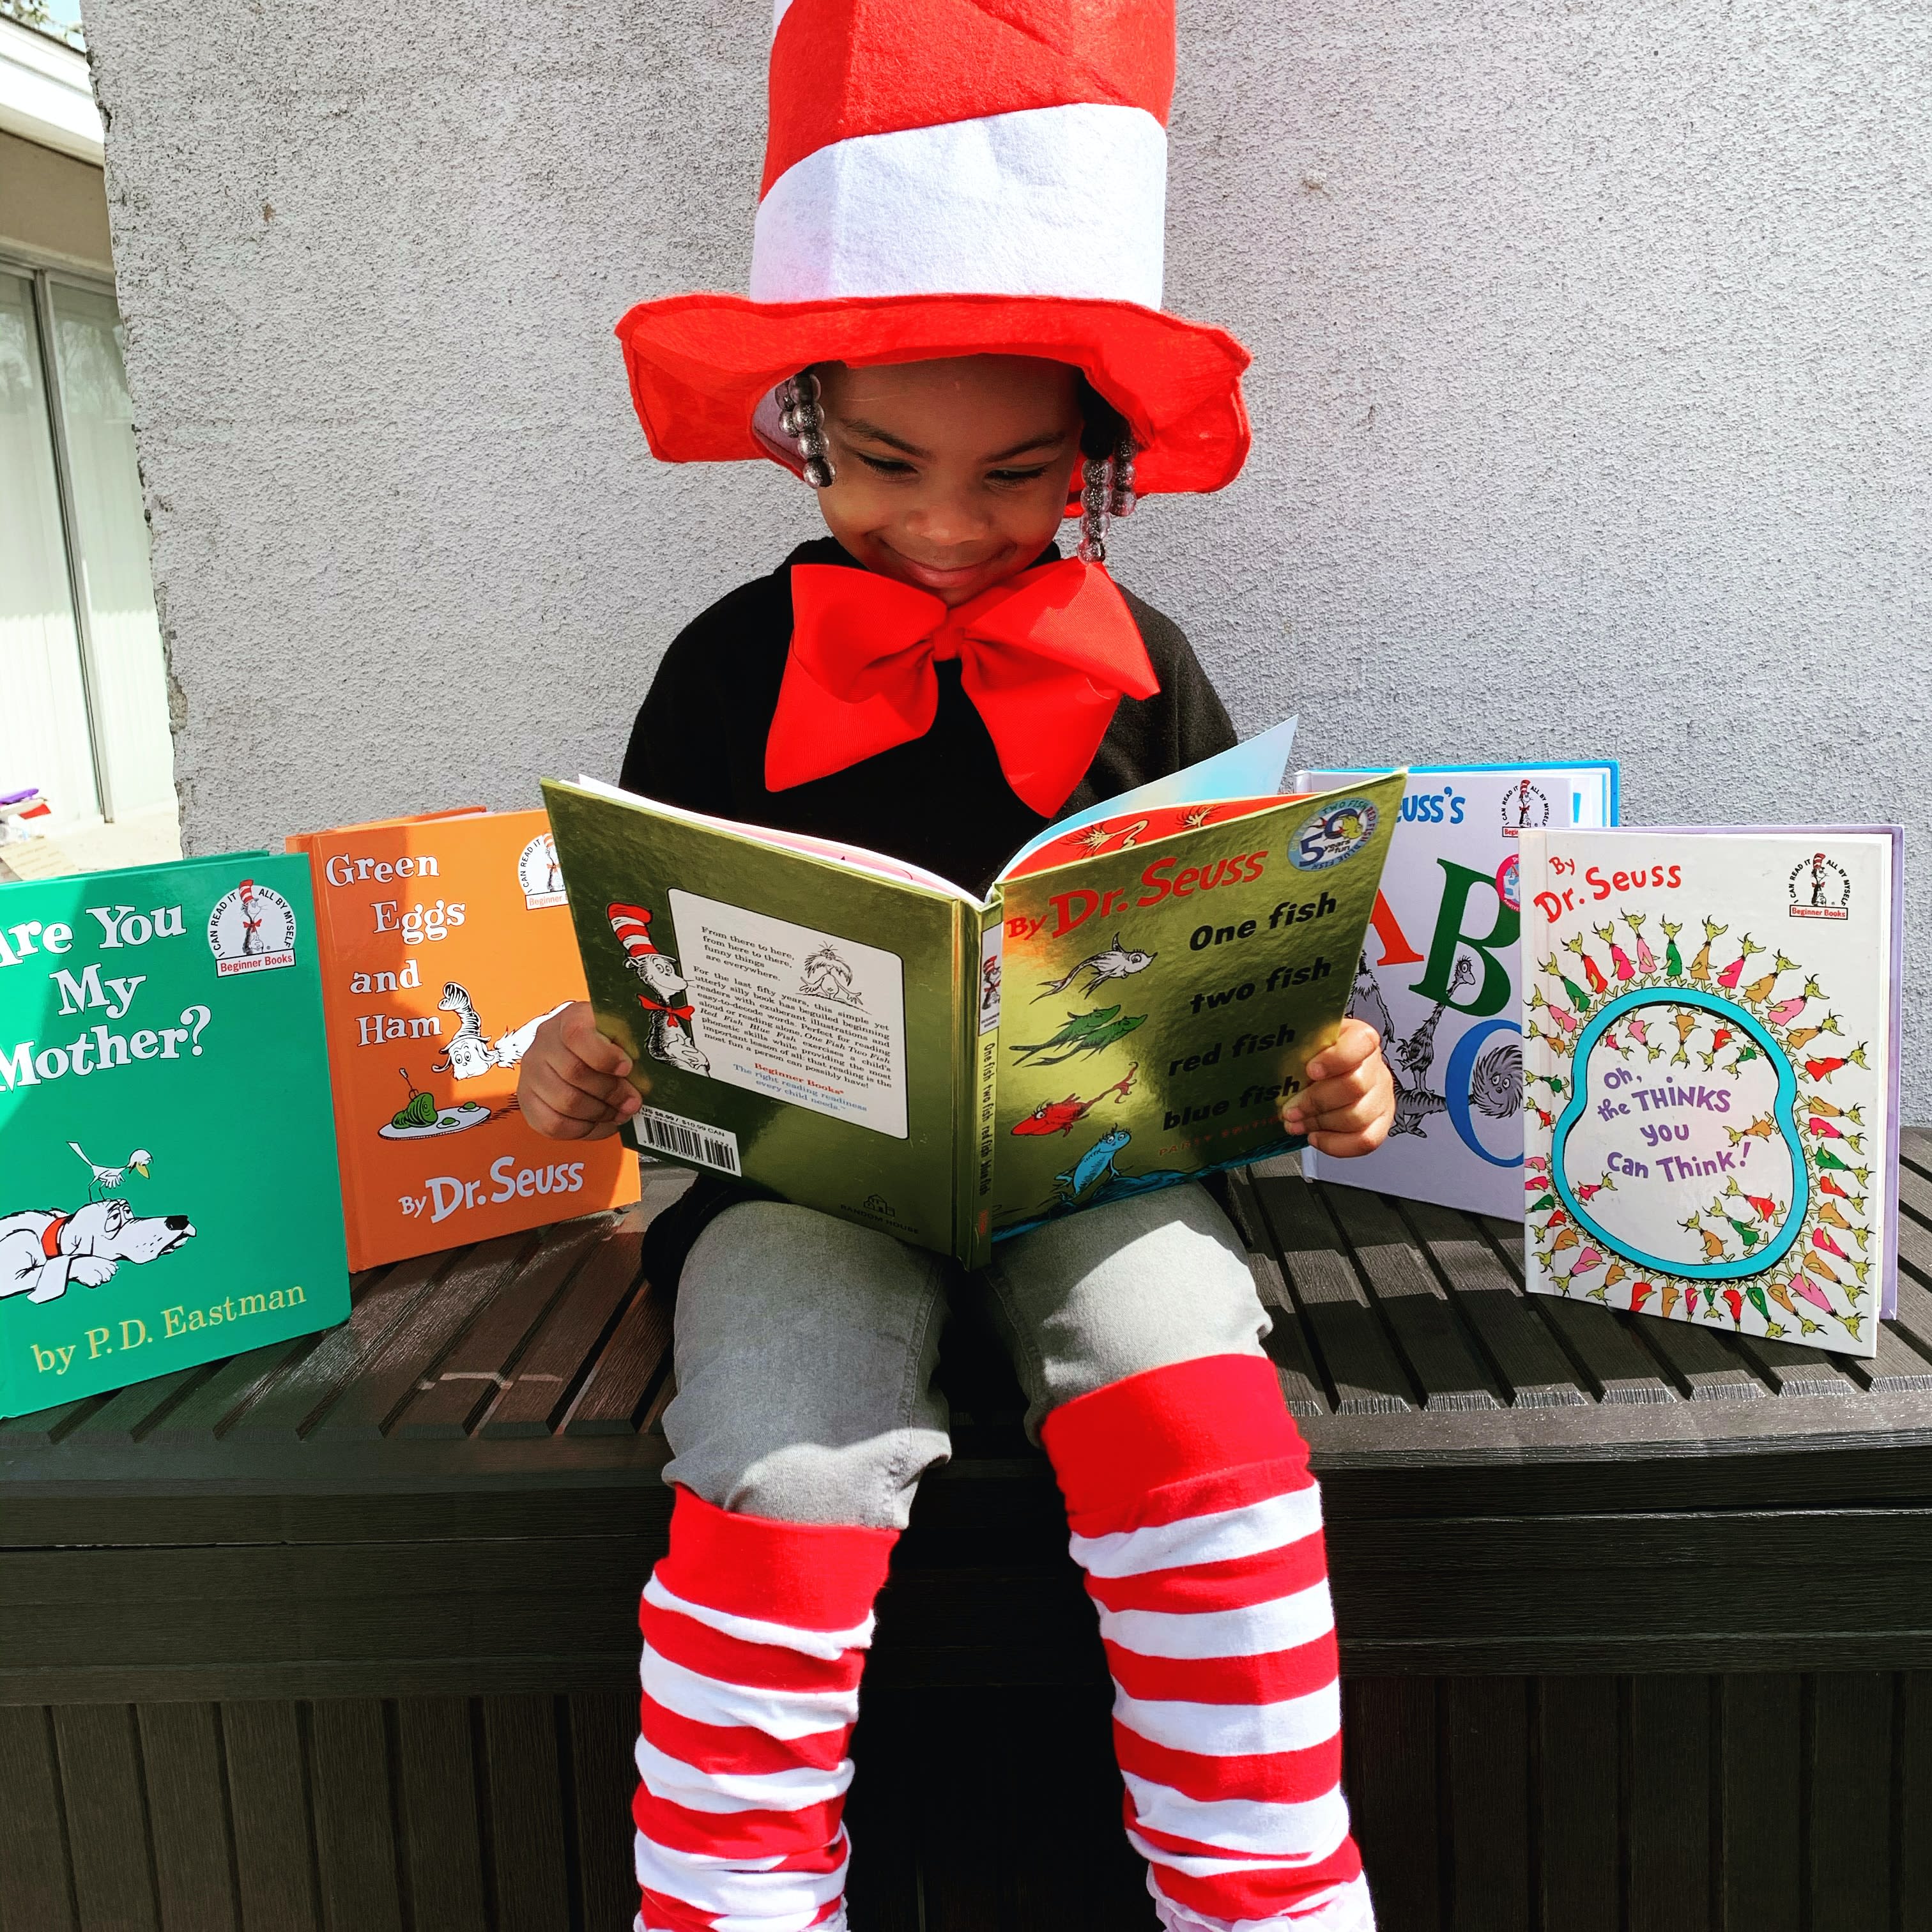 My Daughter for Dr.Suess week! She loves reading and me too!